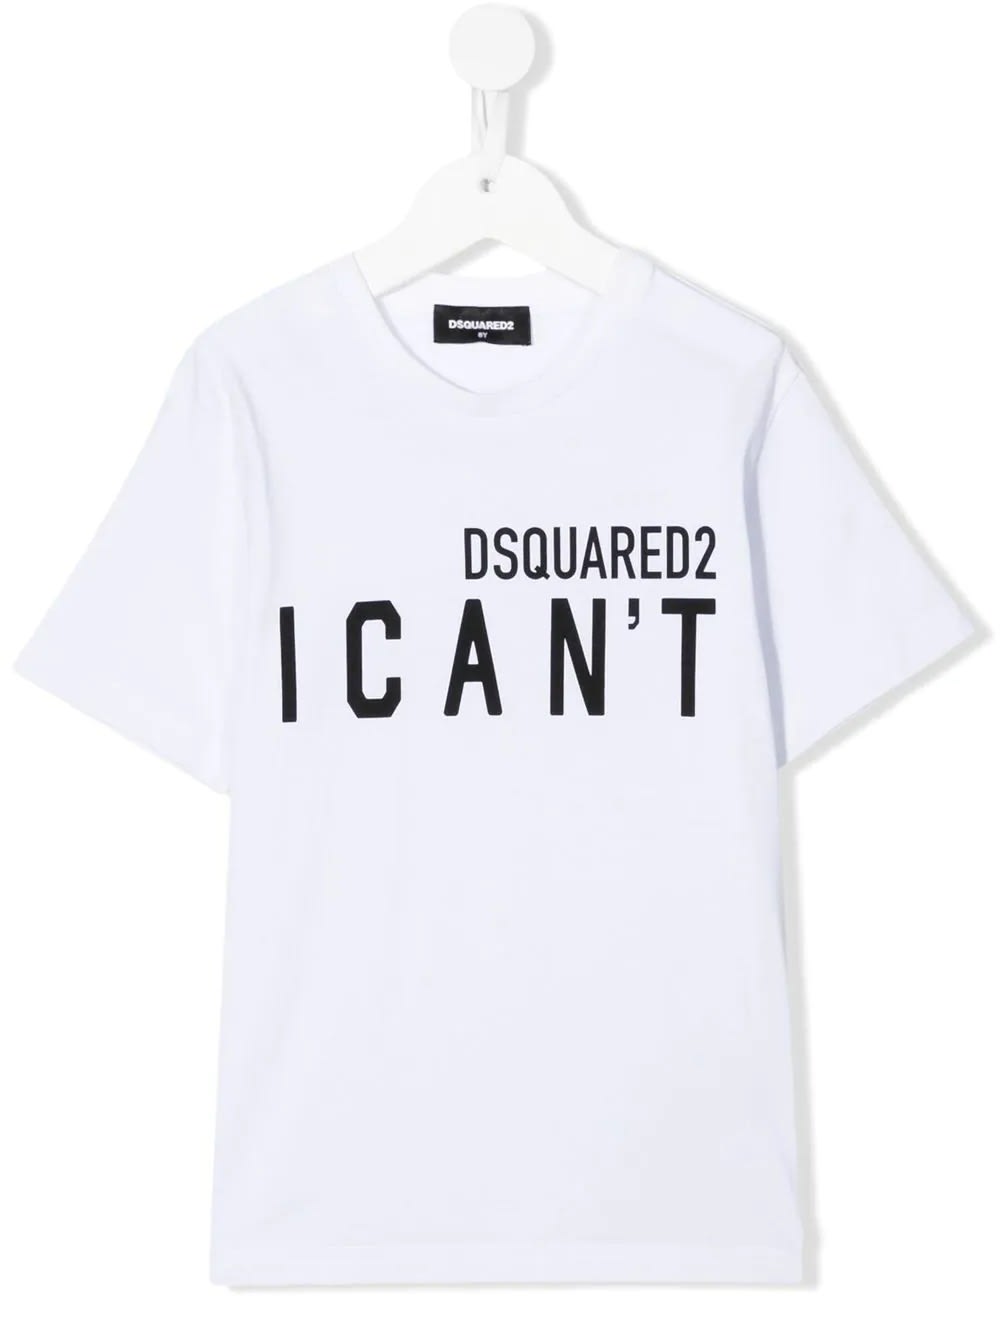 Kids White Dsquared2 Icant T-shirt